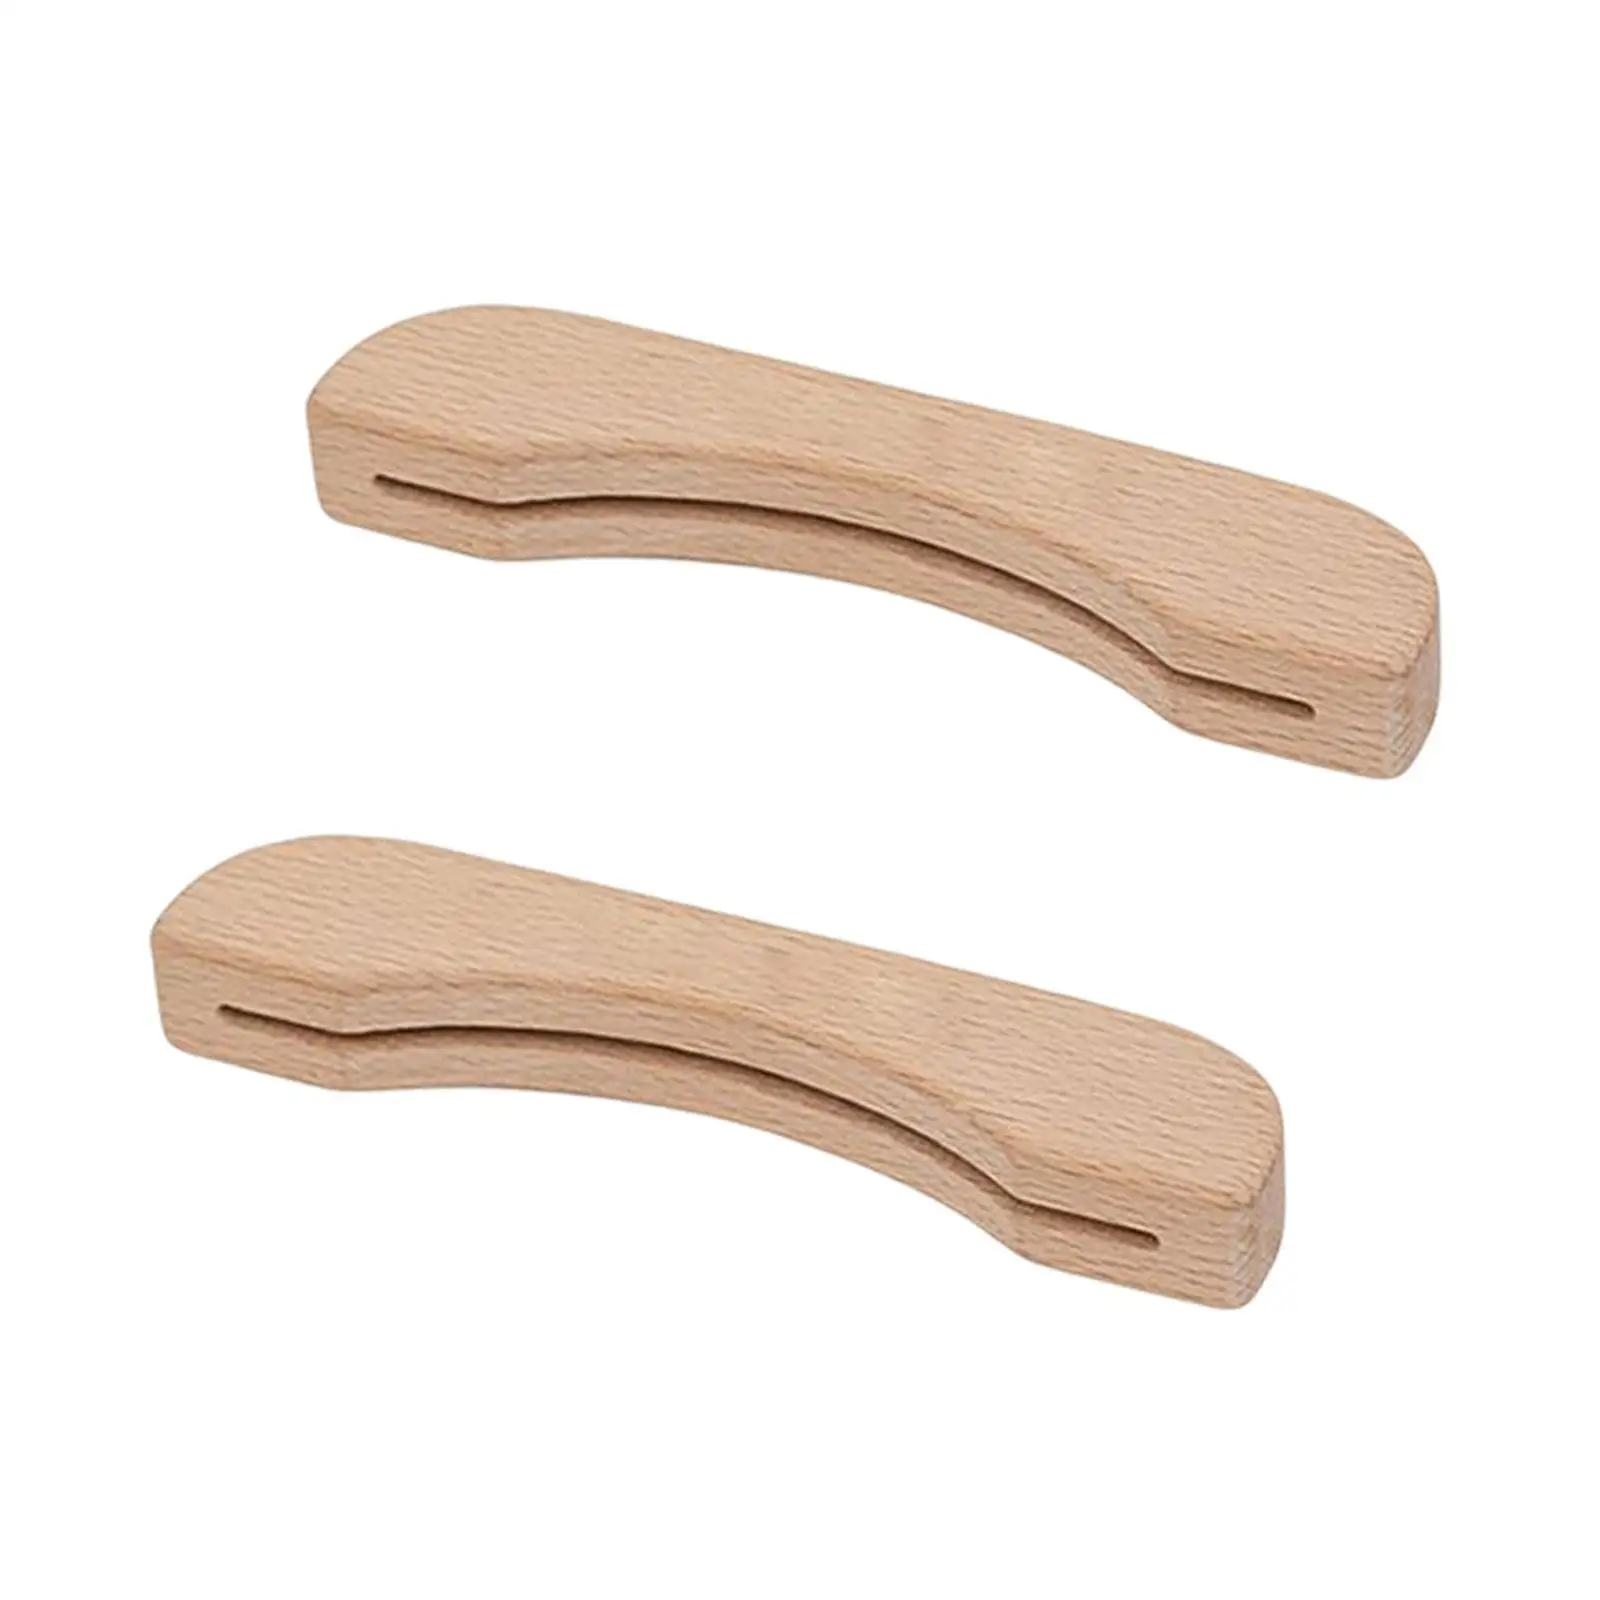 Solid Wood BBQ Pan Handle Heat Resistant Anti Scalding Grip for Grill Pan Sauce Pan